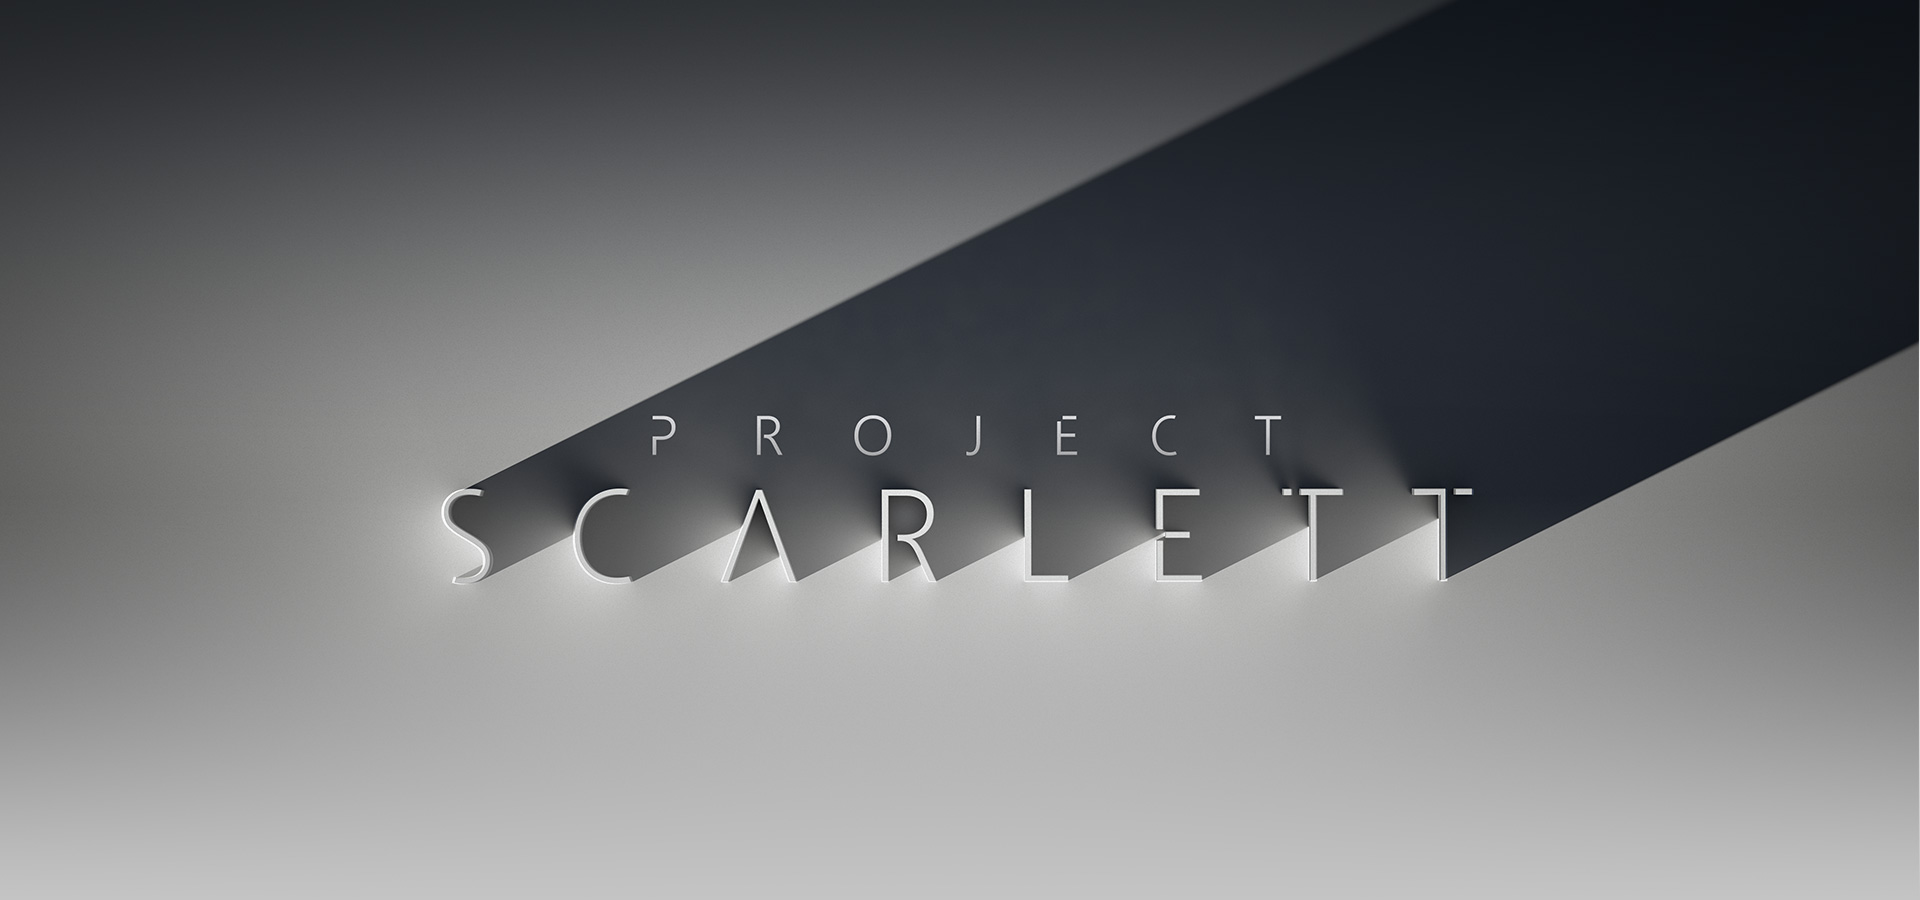 E3 2019 Microsoft News: Xbox Scarlett will Support 8k Graphics at 120FPS